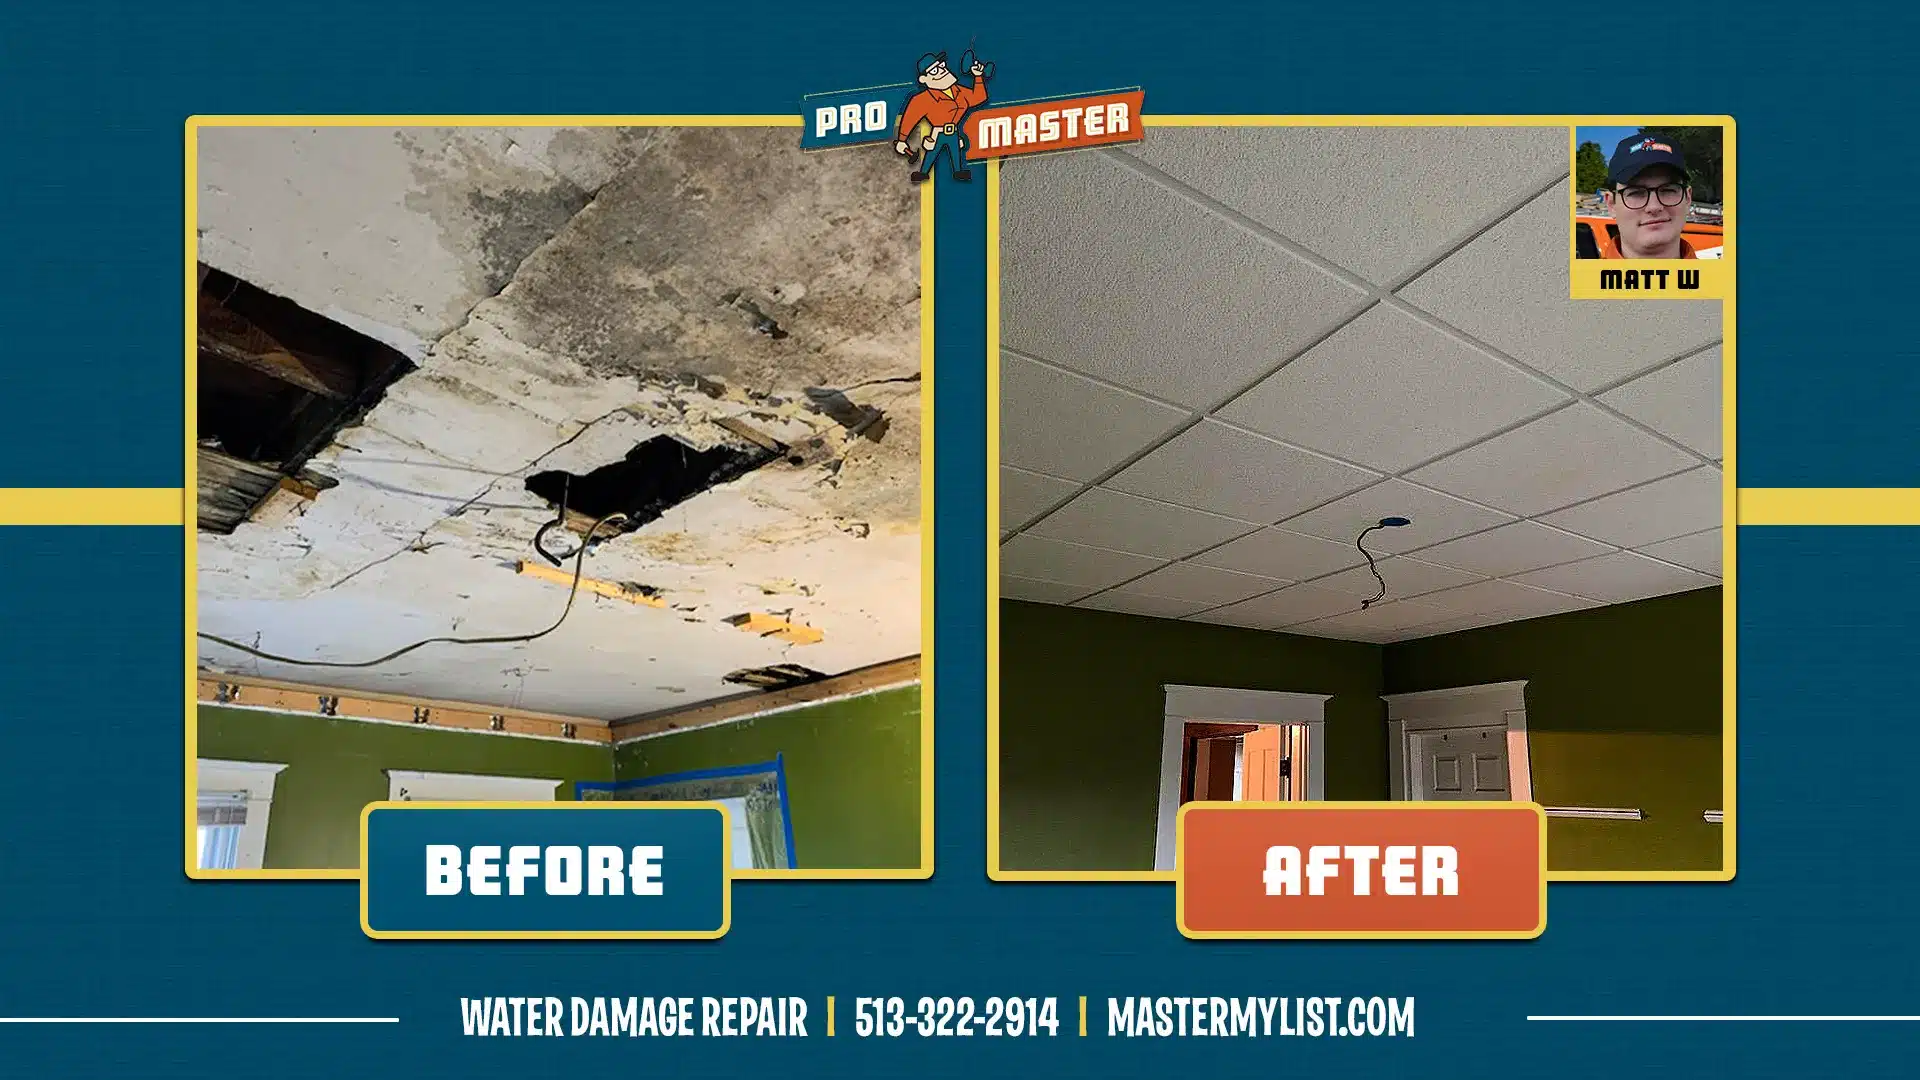 Before and after image of ceiling water damage repair by ProMaster.